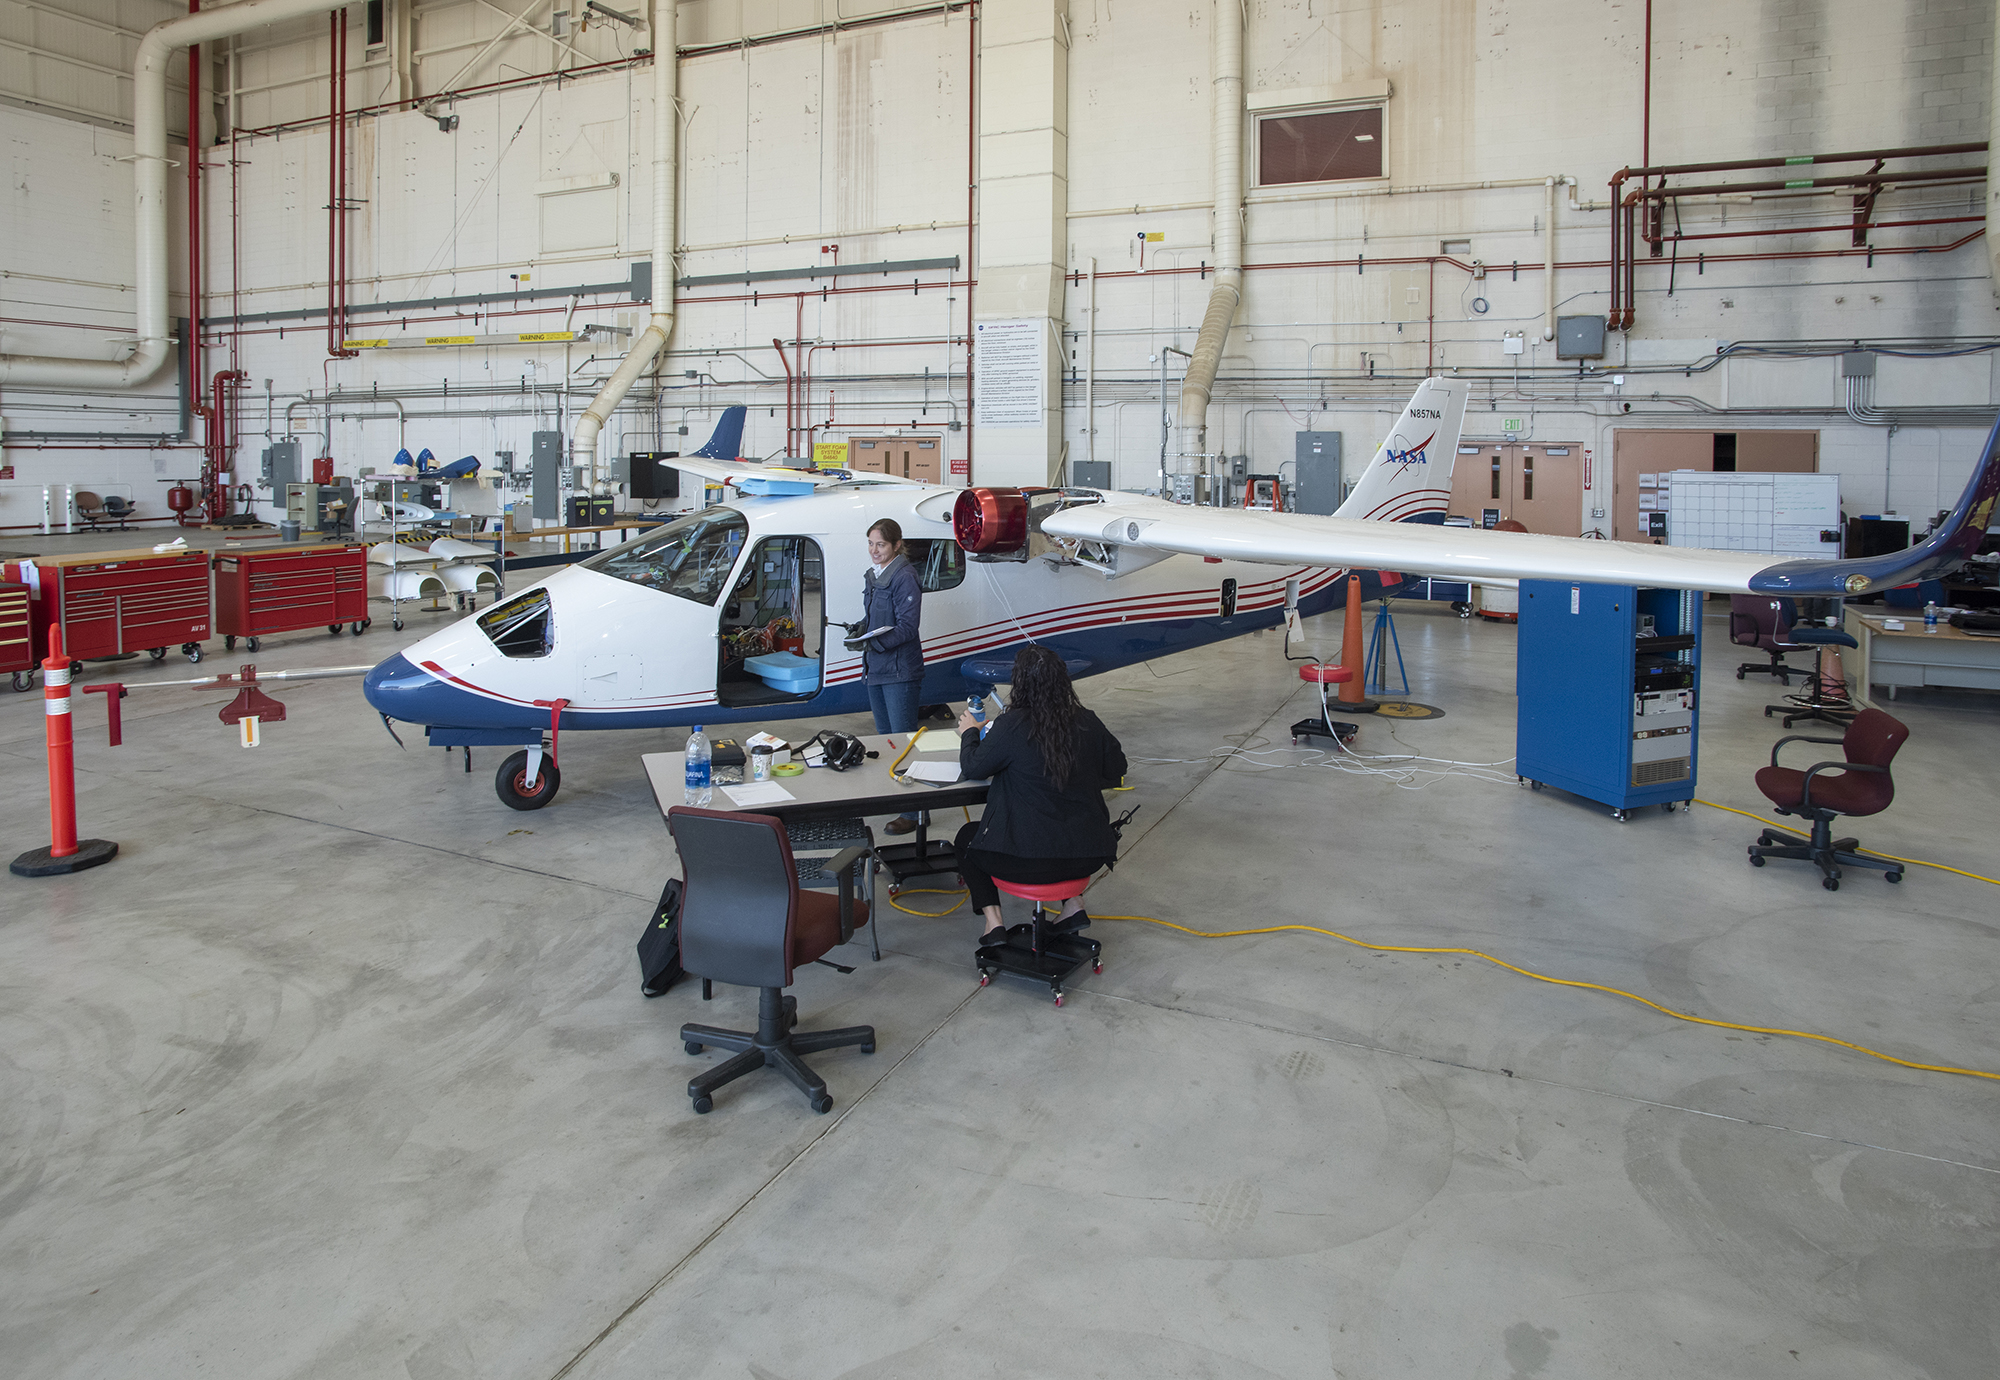 NASA engineers put the X-57 through its initial telemetry tests at AFRC.